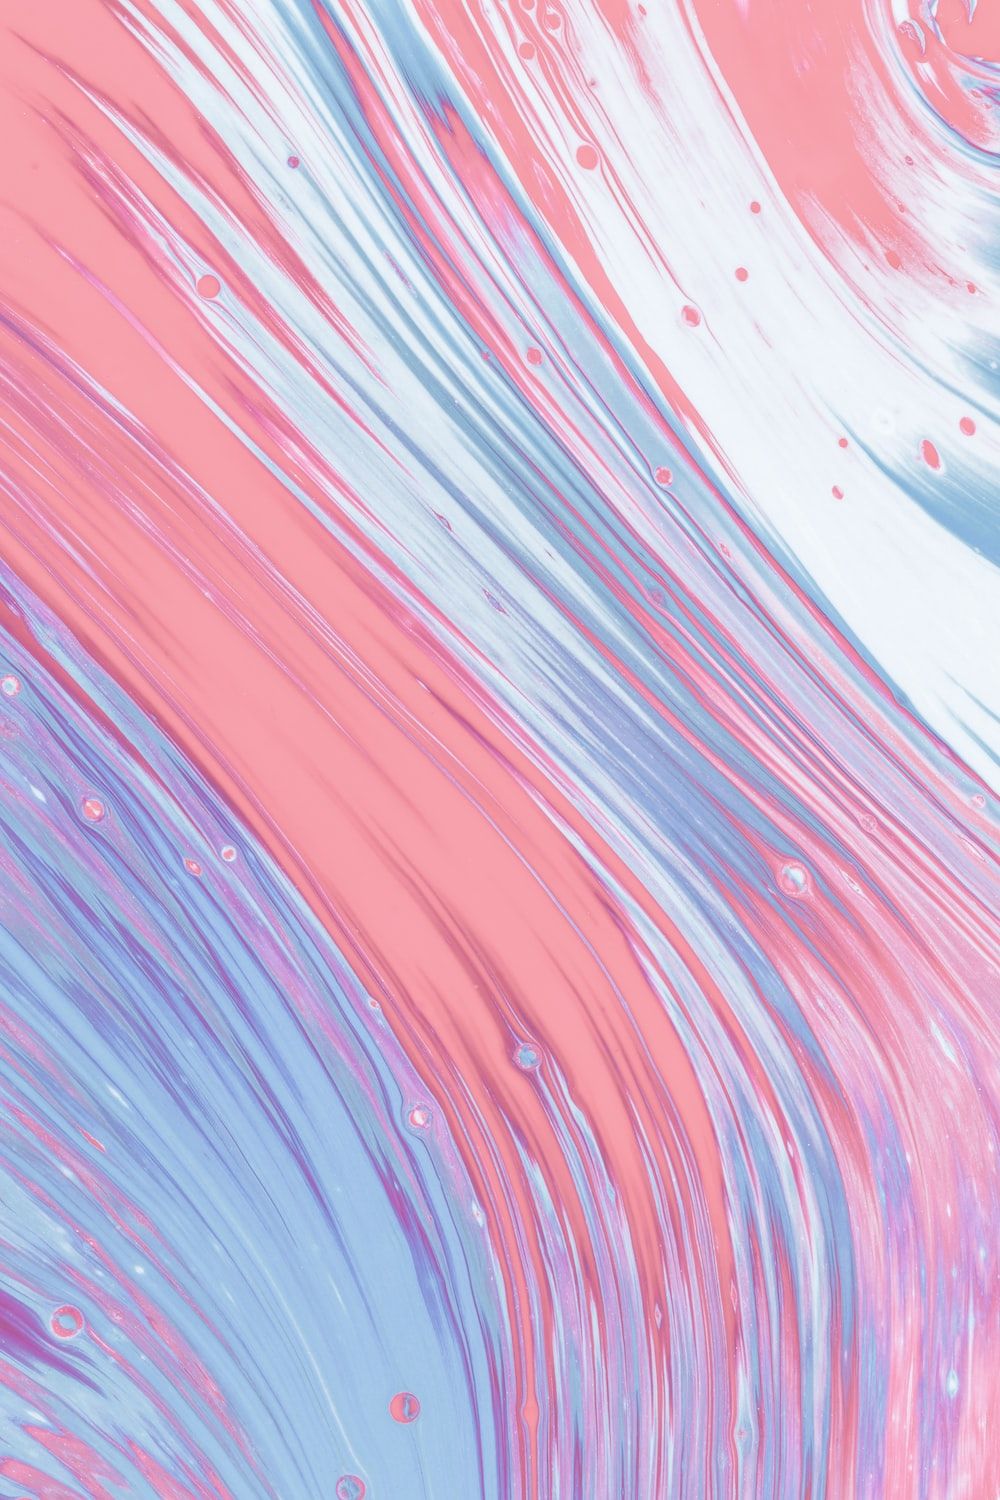 A pink, blue and white swirled abstract painting - Abstract